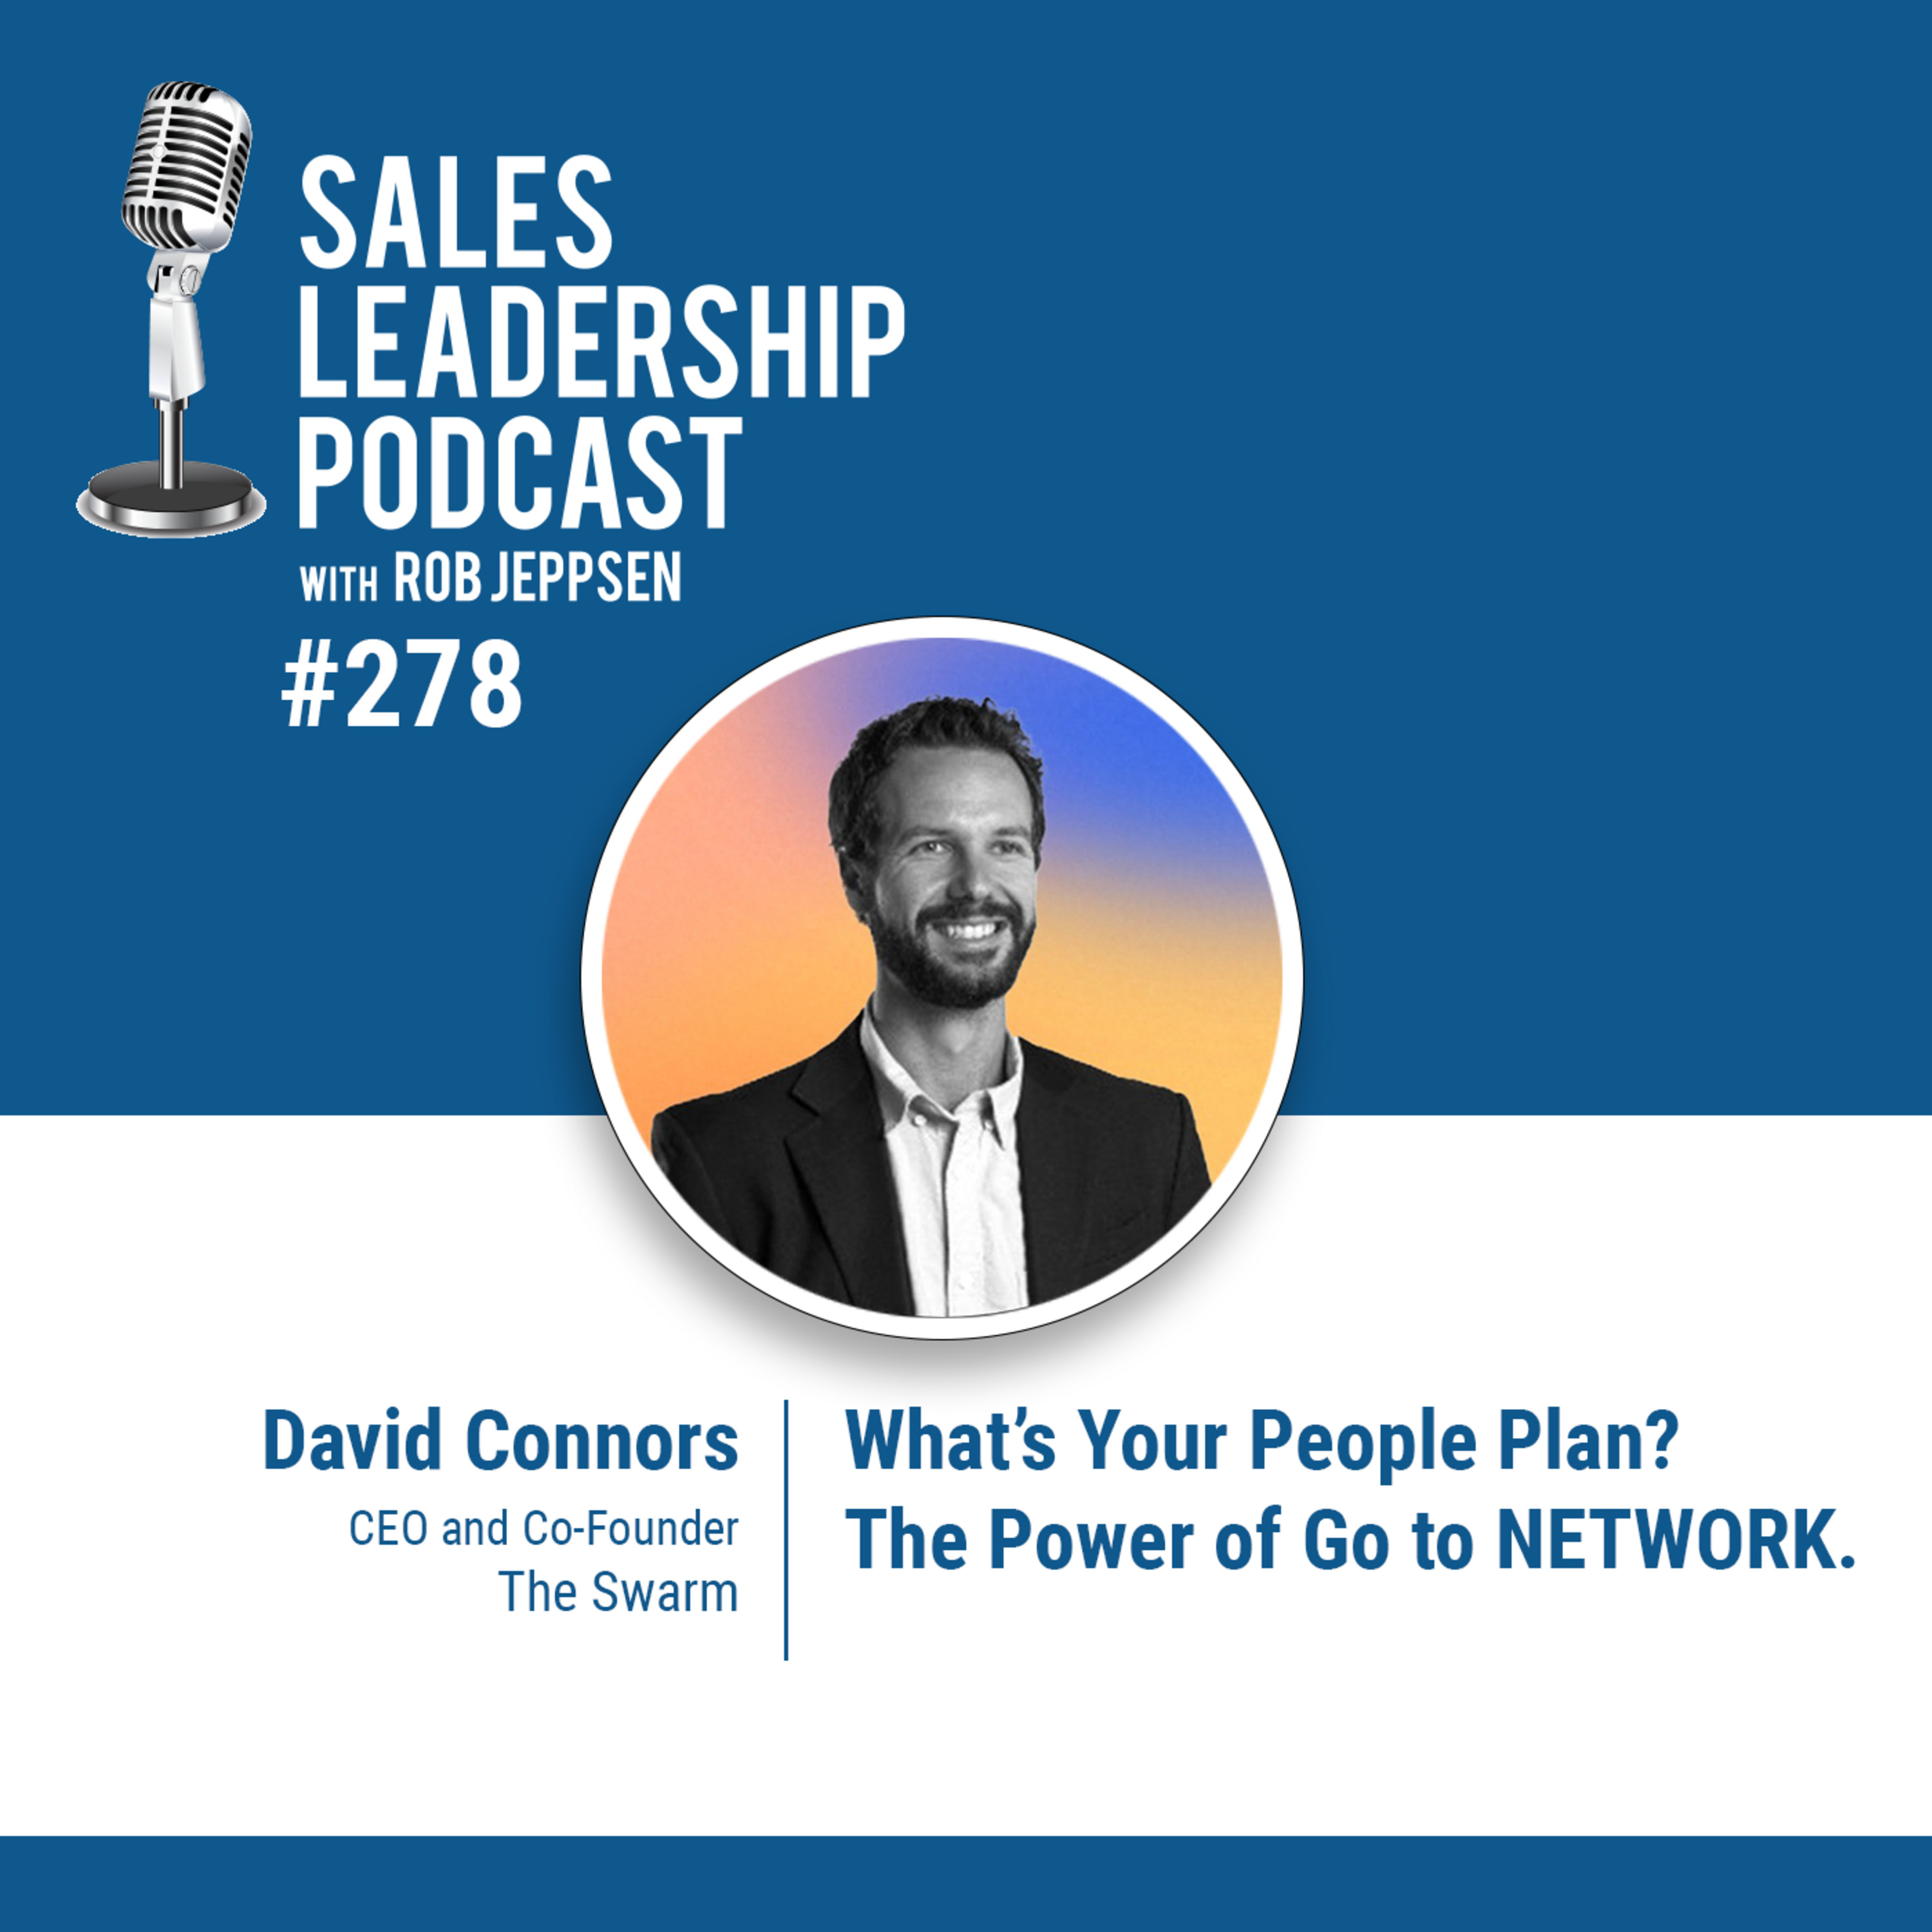 Episode 278: David Connors, CEO and Co-Founder of The Swarm: What’s Your People Plan? The Power of Go to NETWORK.